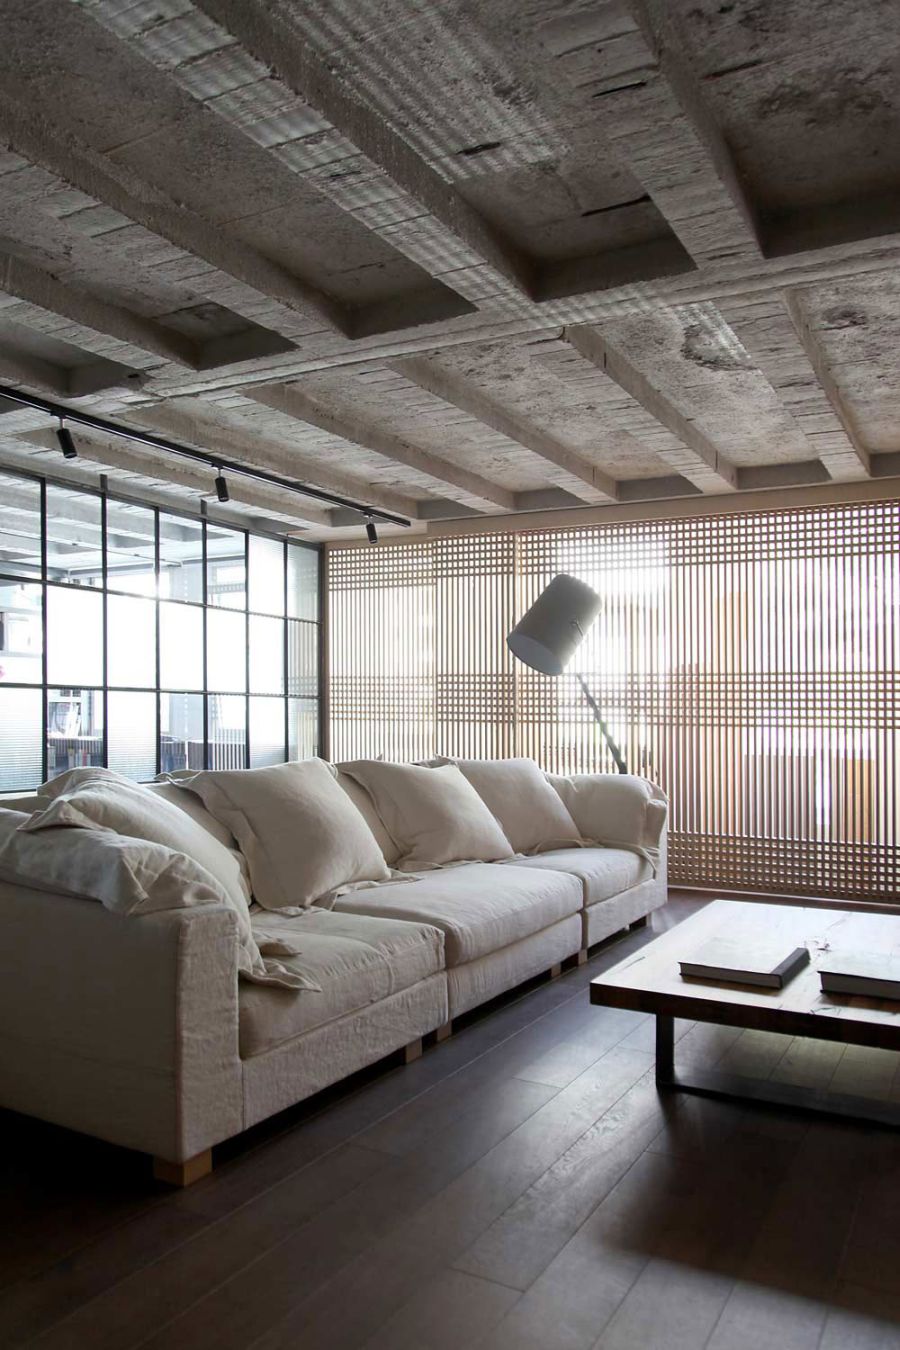 Living Room Ceiling with Loft